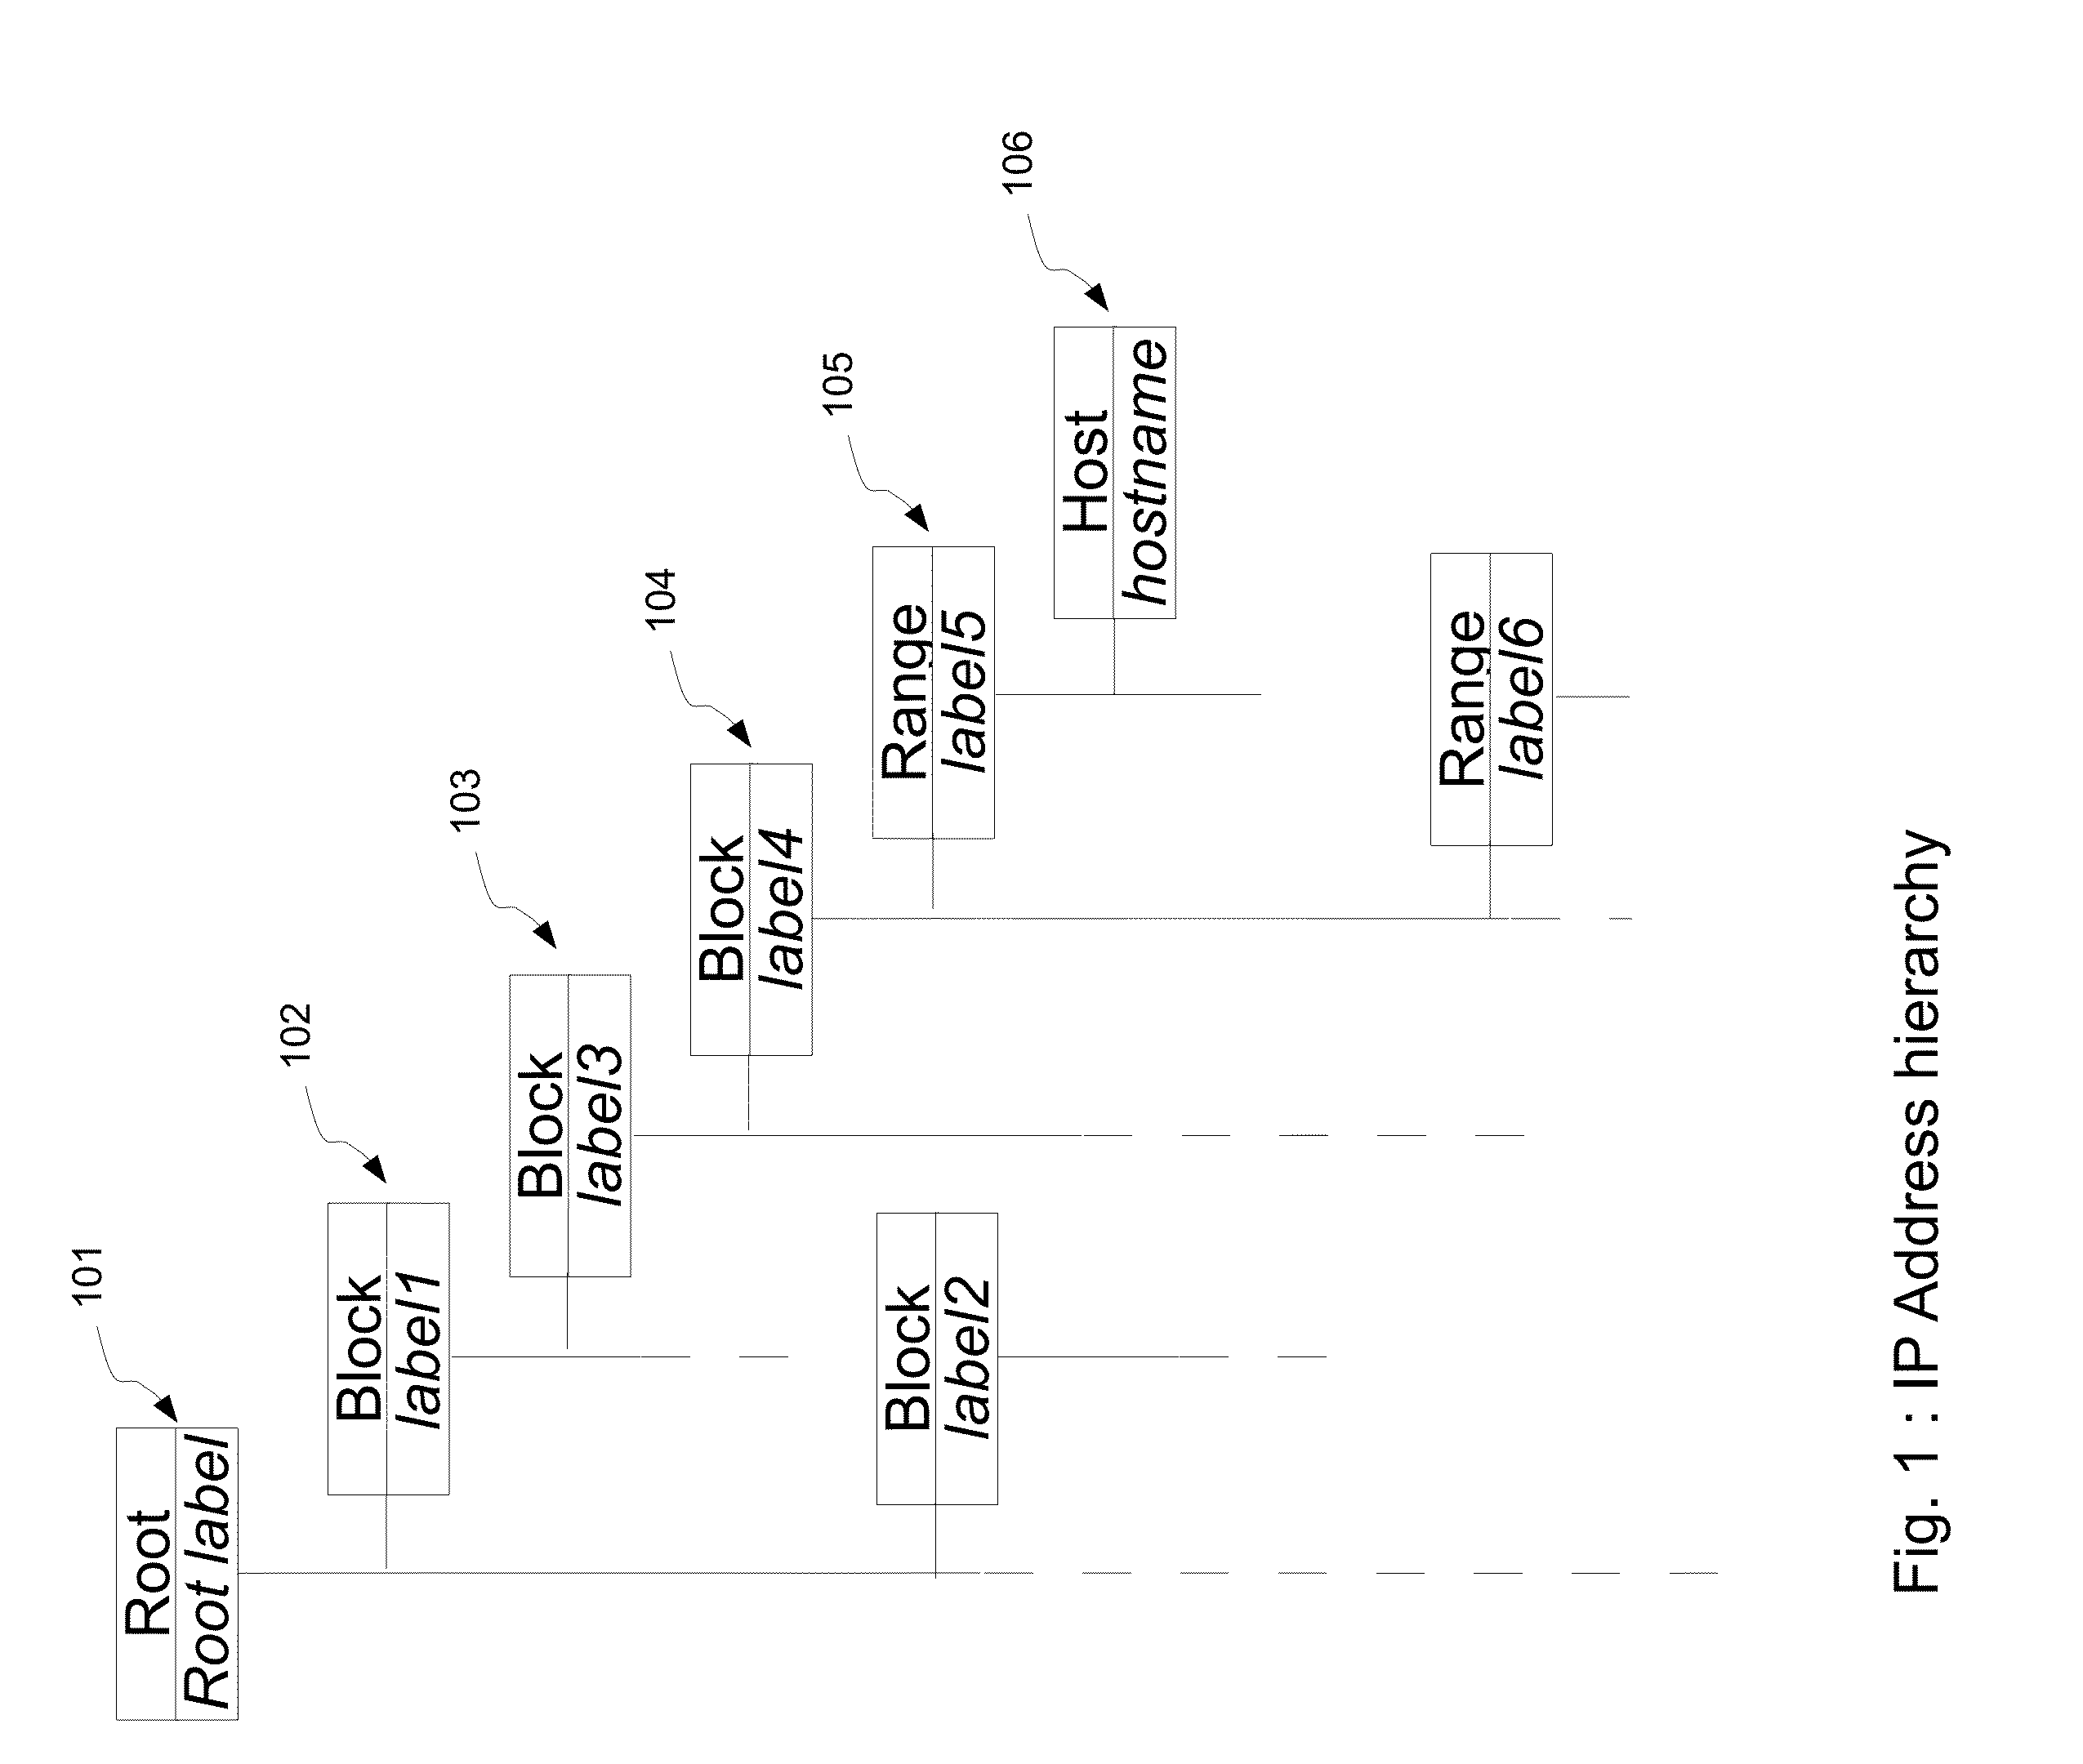 System and method for IP network semantic label storage and management